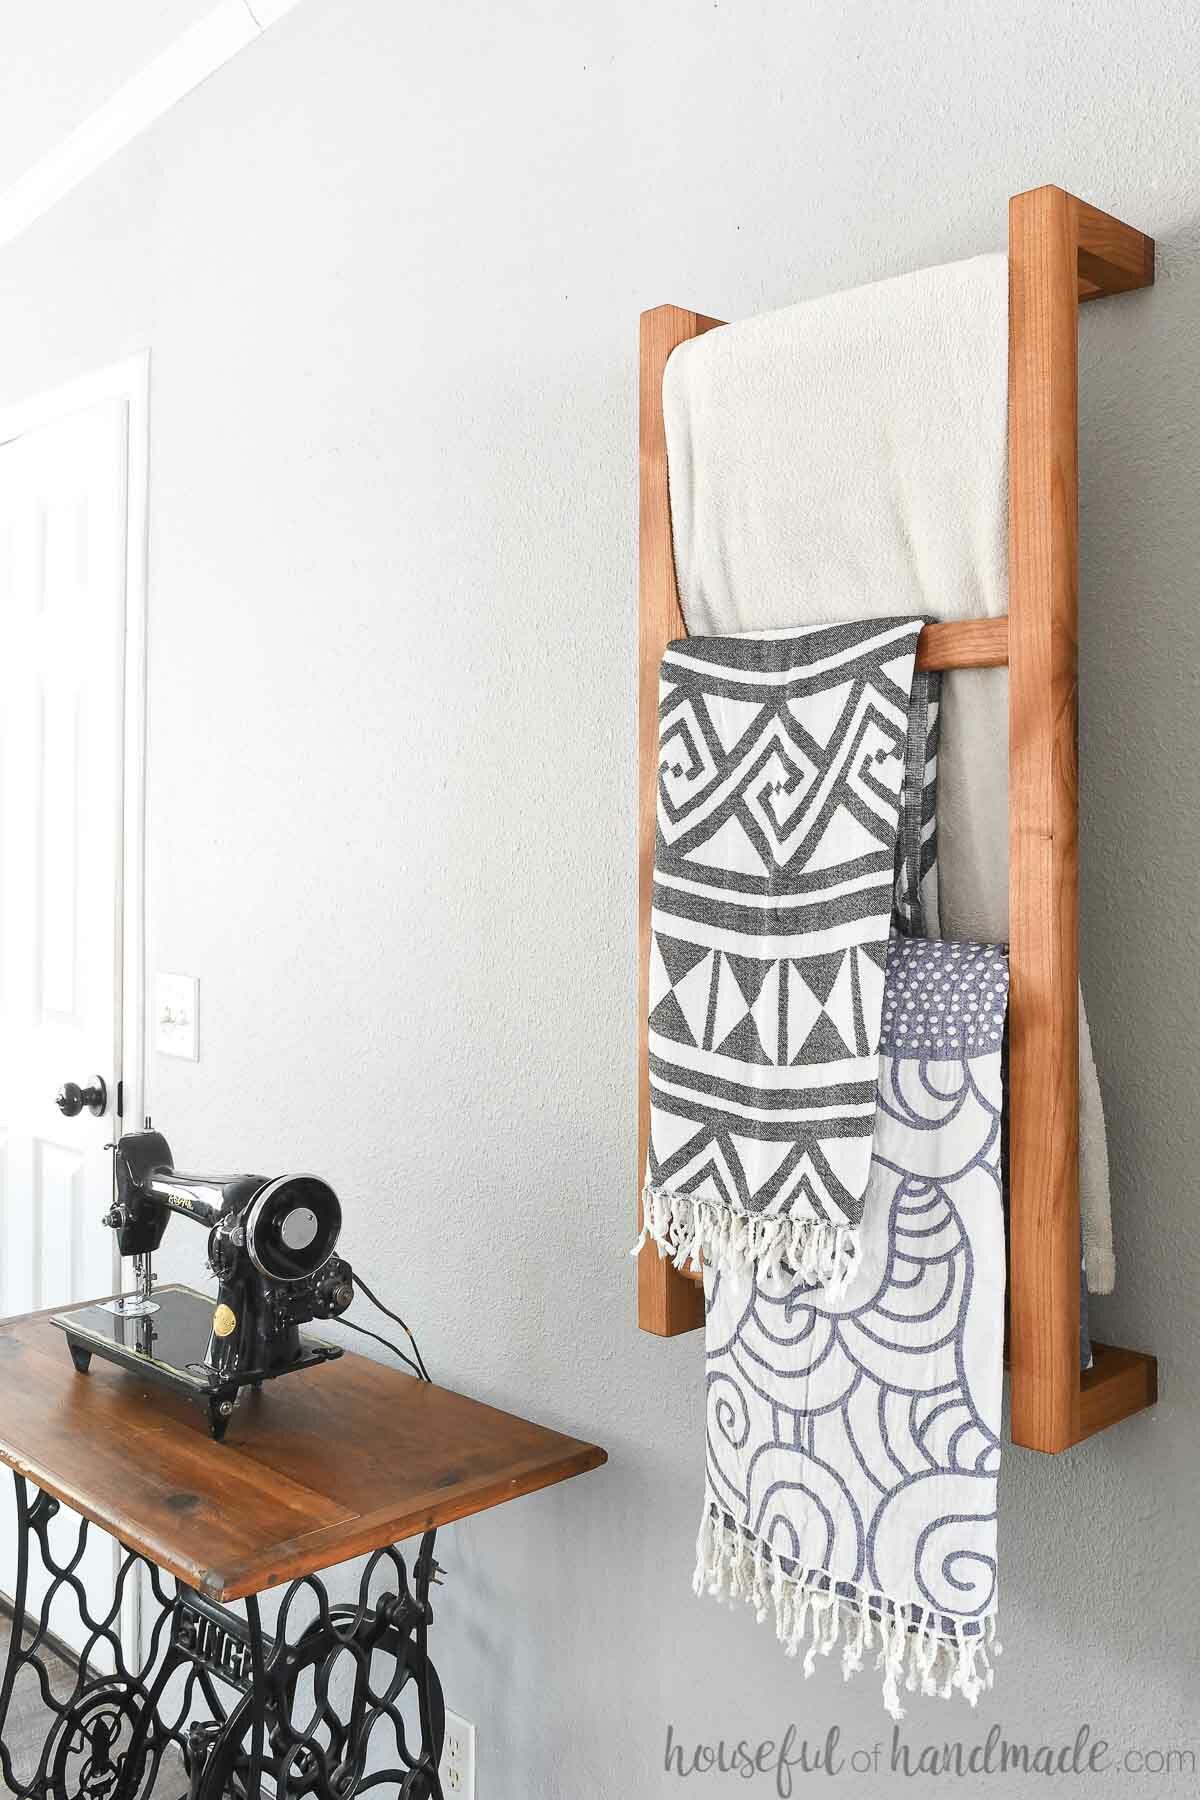 Side view of the wall mounted ladder hanging next to a vintage sewing table with blankets on it. 